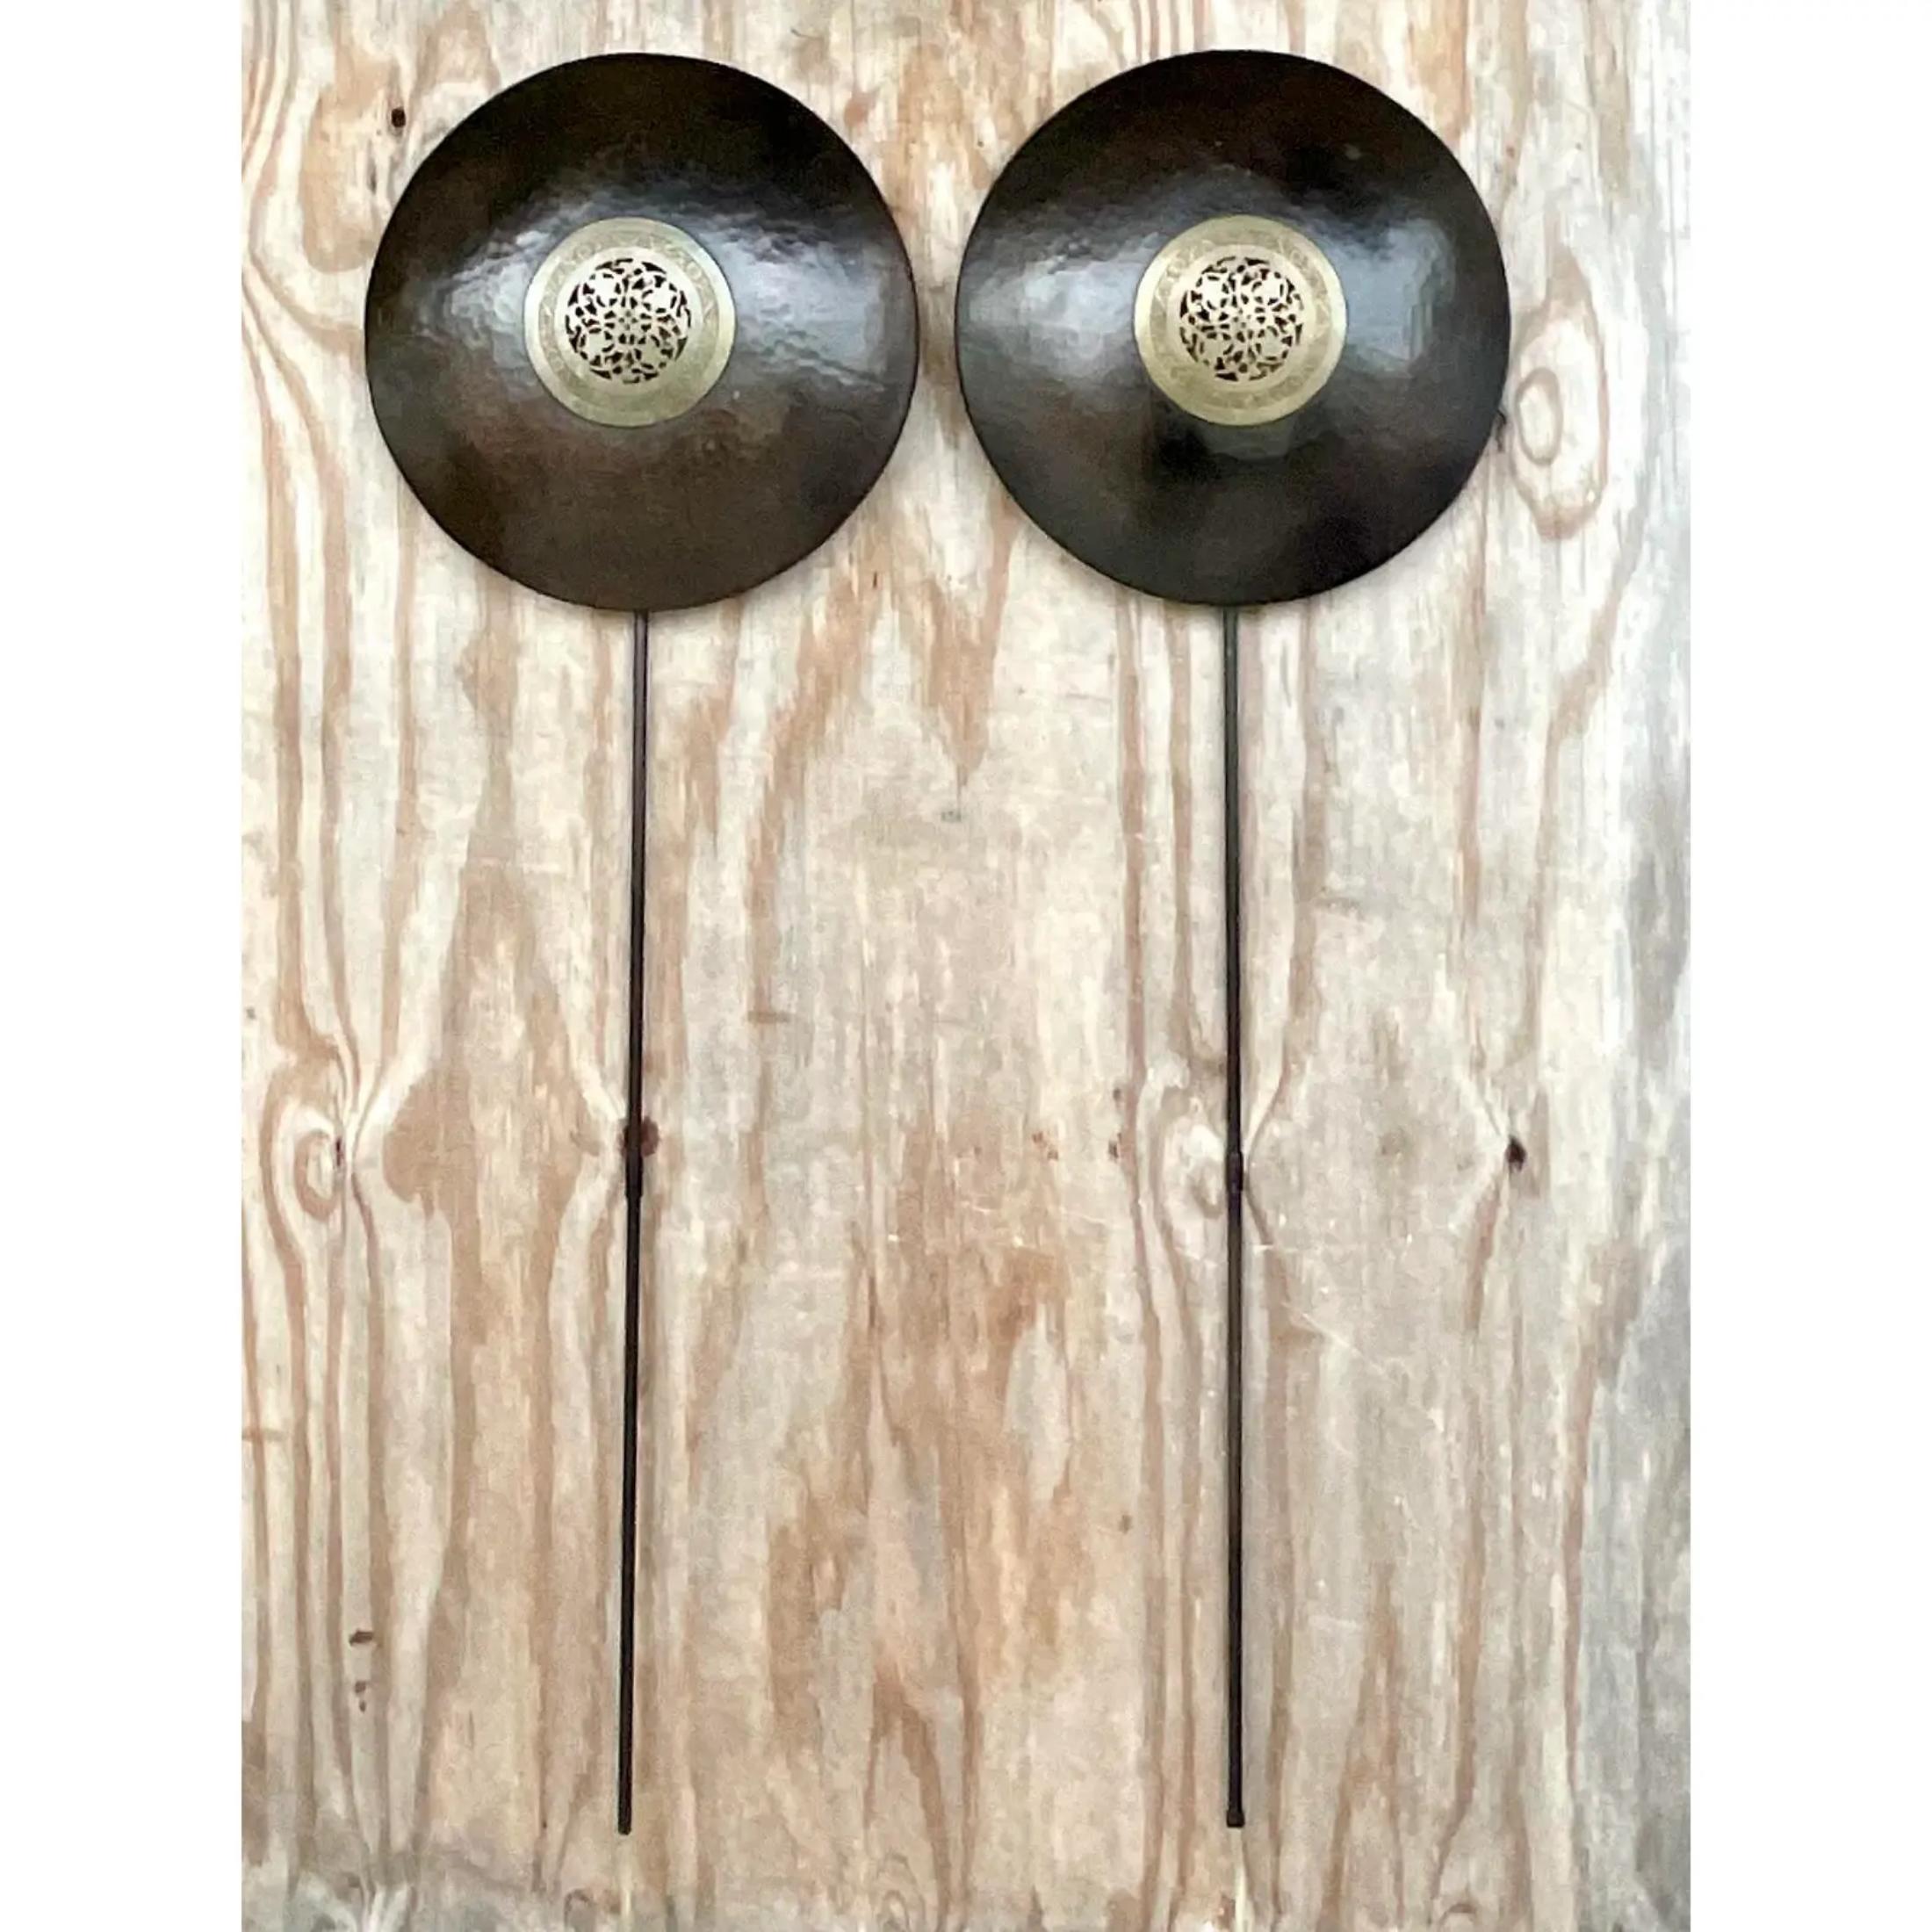 A fabulous pair of vintage Asian wall sconces. A chic Asian Medallion design with a patinated brass finish. 3ft metal rod holds the plug. Acquired from a Palm Beach estate